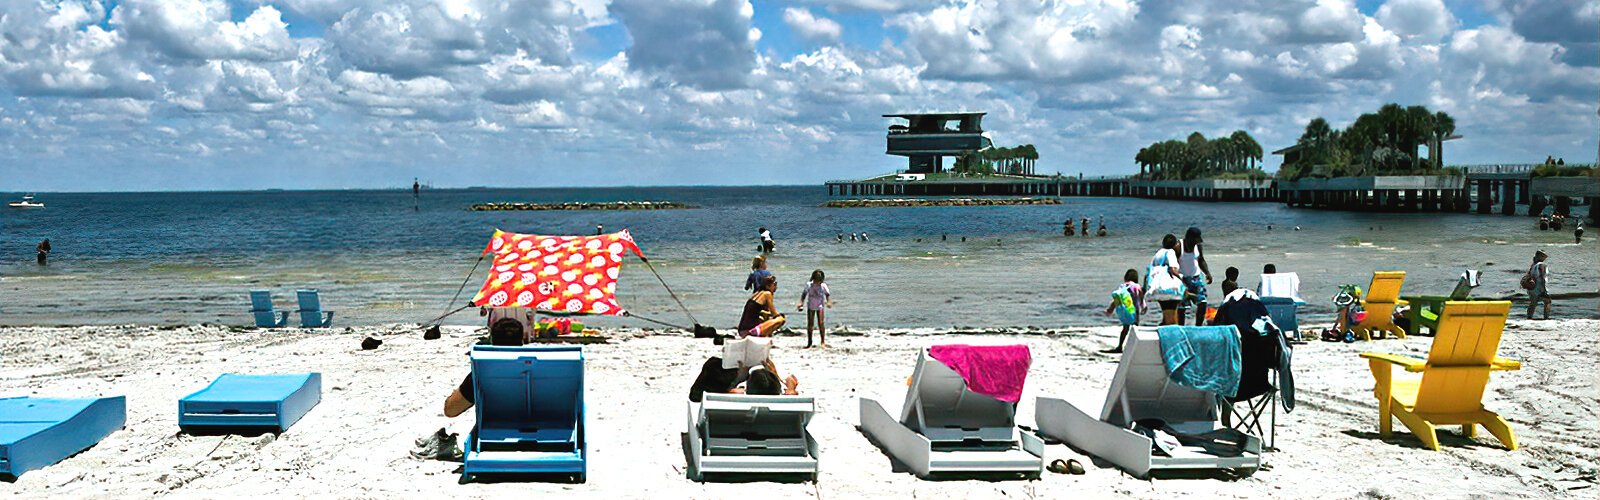 The inviting Spa Beach at the St Pete Pier is a true beach with warm silky sand and lounging chairs, right in downtown St Petersburg.